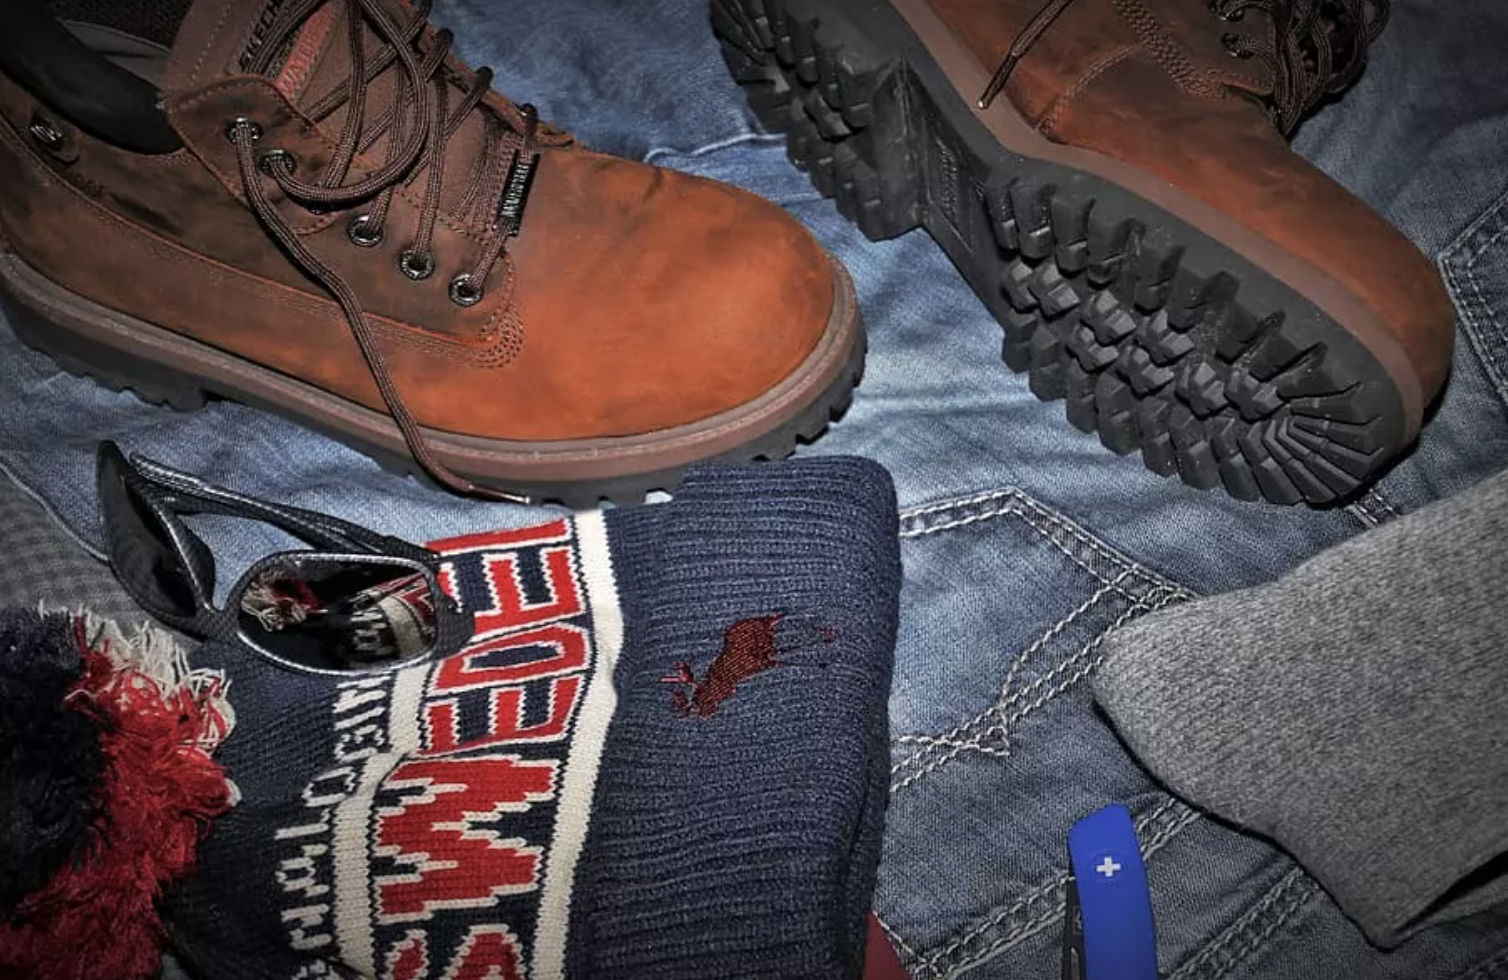 Hiking boots and clothing are two heavy items that take up a lot of suitcase space.